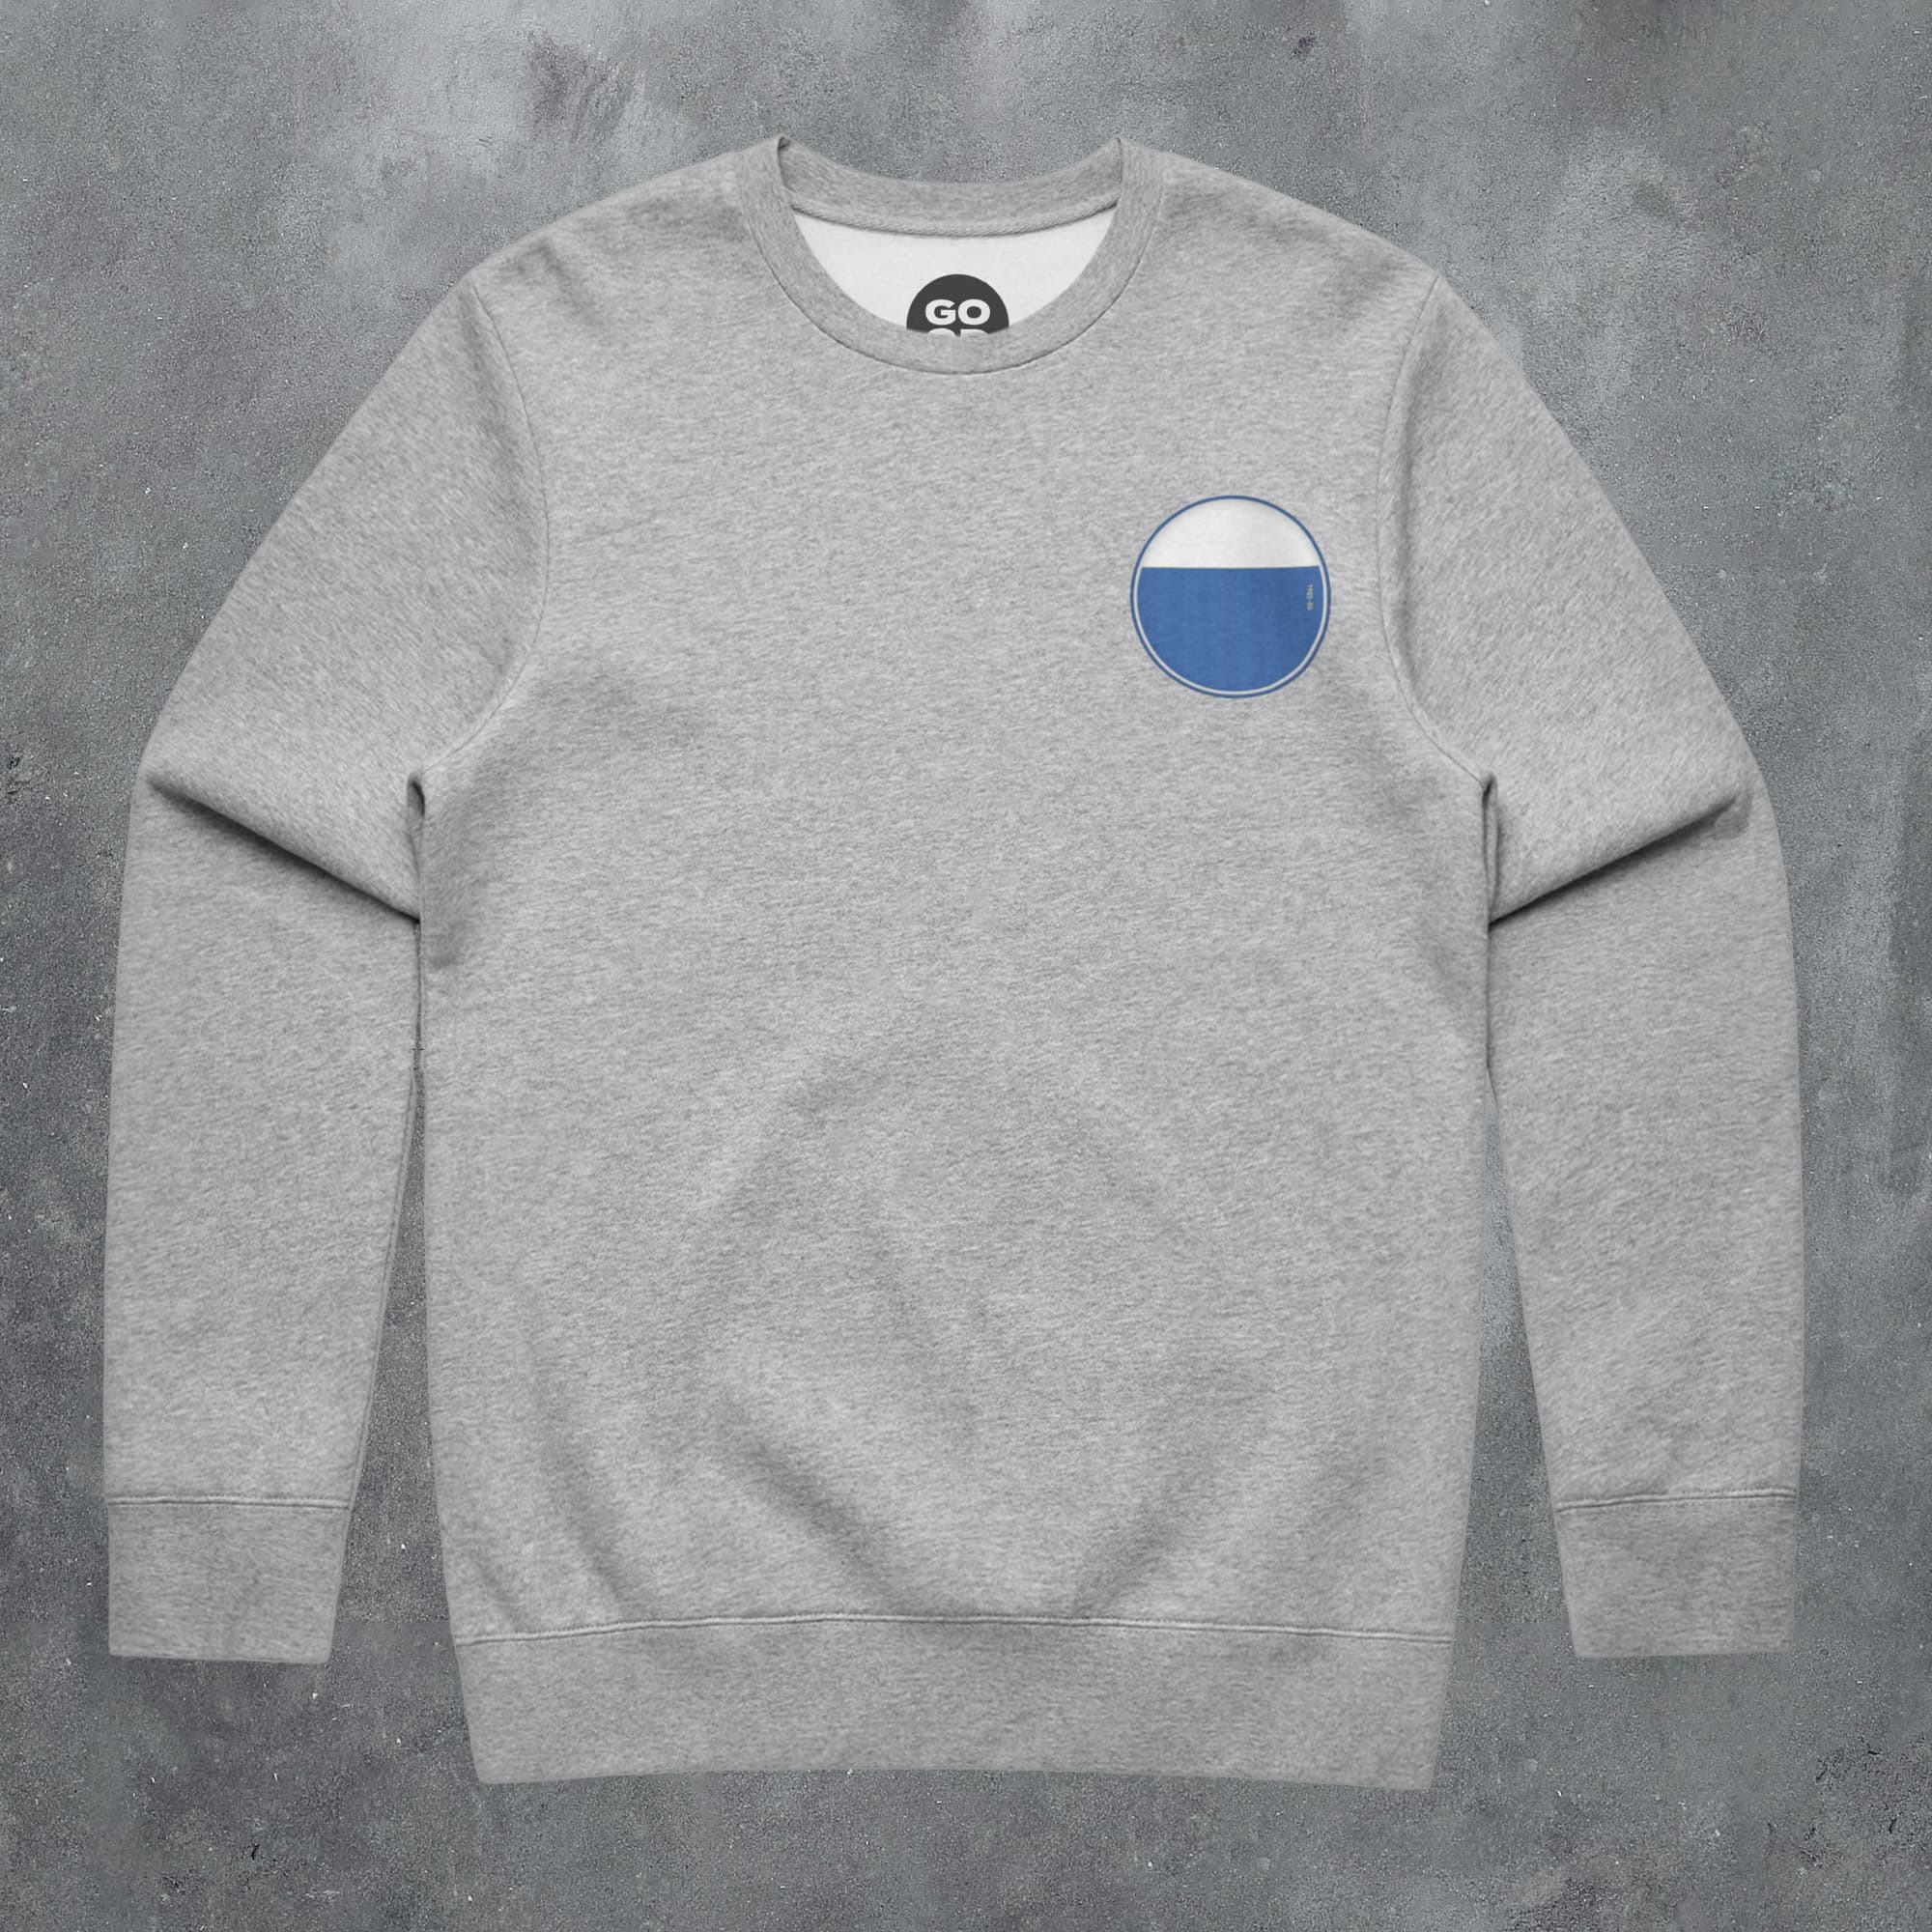 a grey sweatshirt with a blue circle on the chest